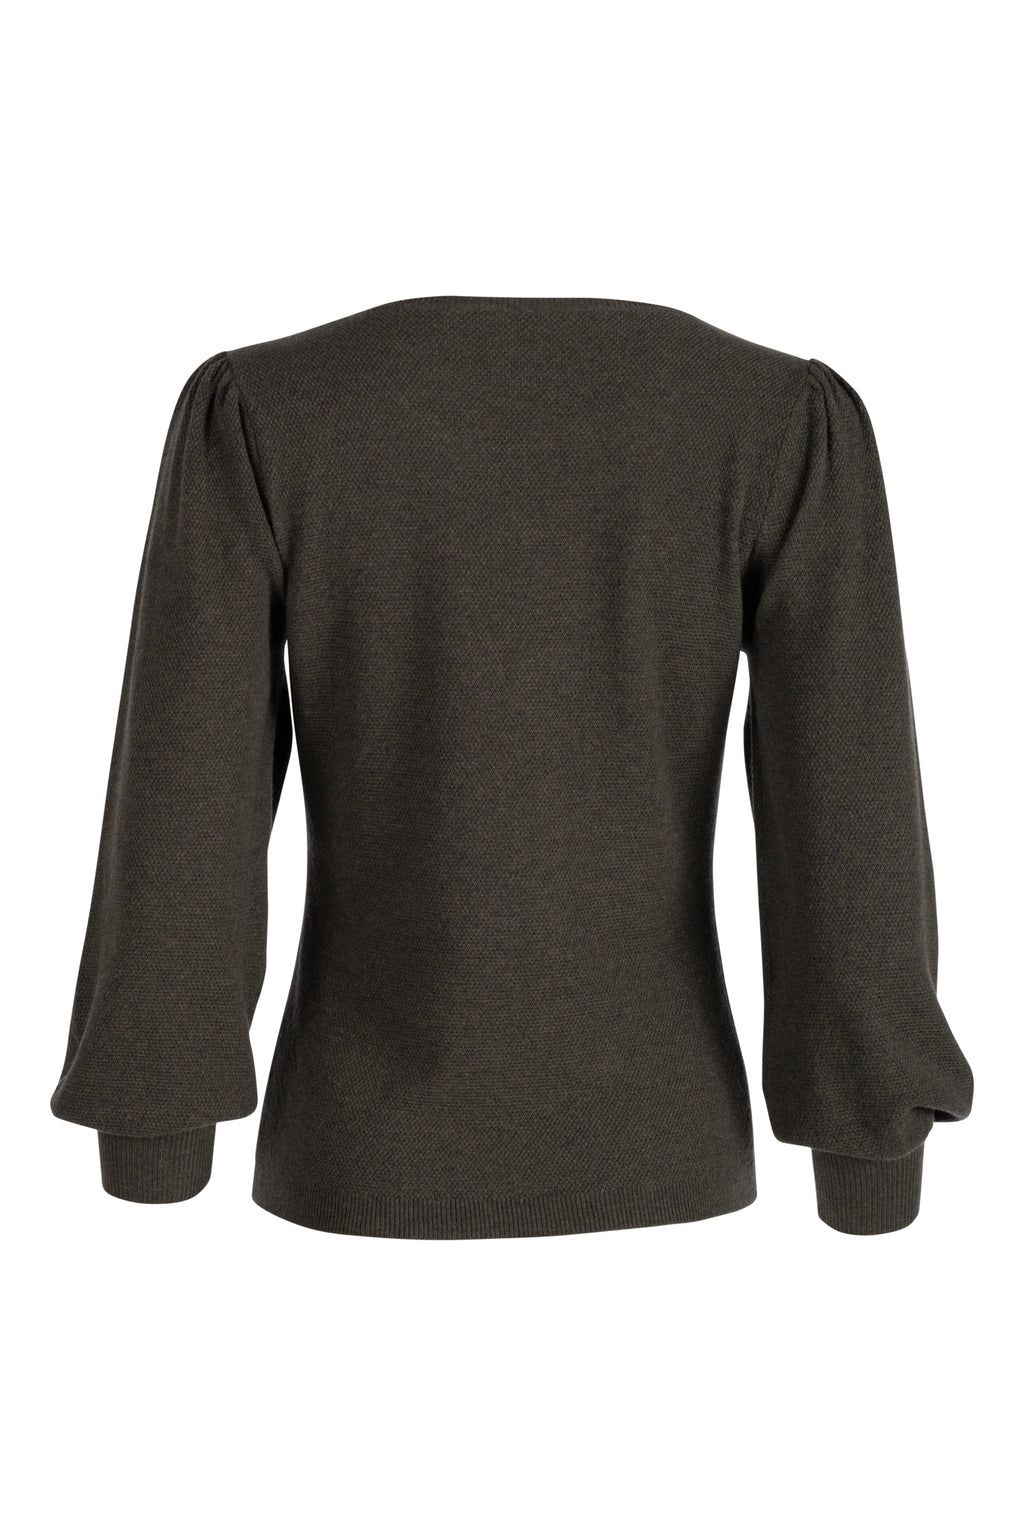 Ruched Long Sleeve Sweater - Olive